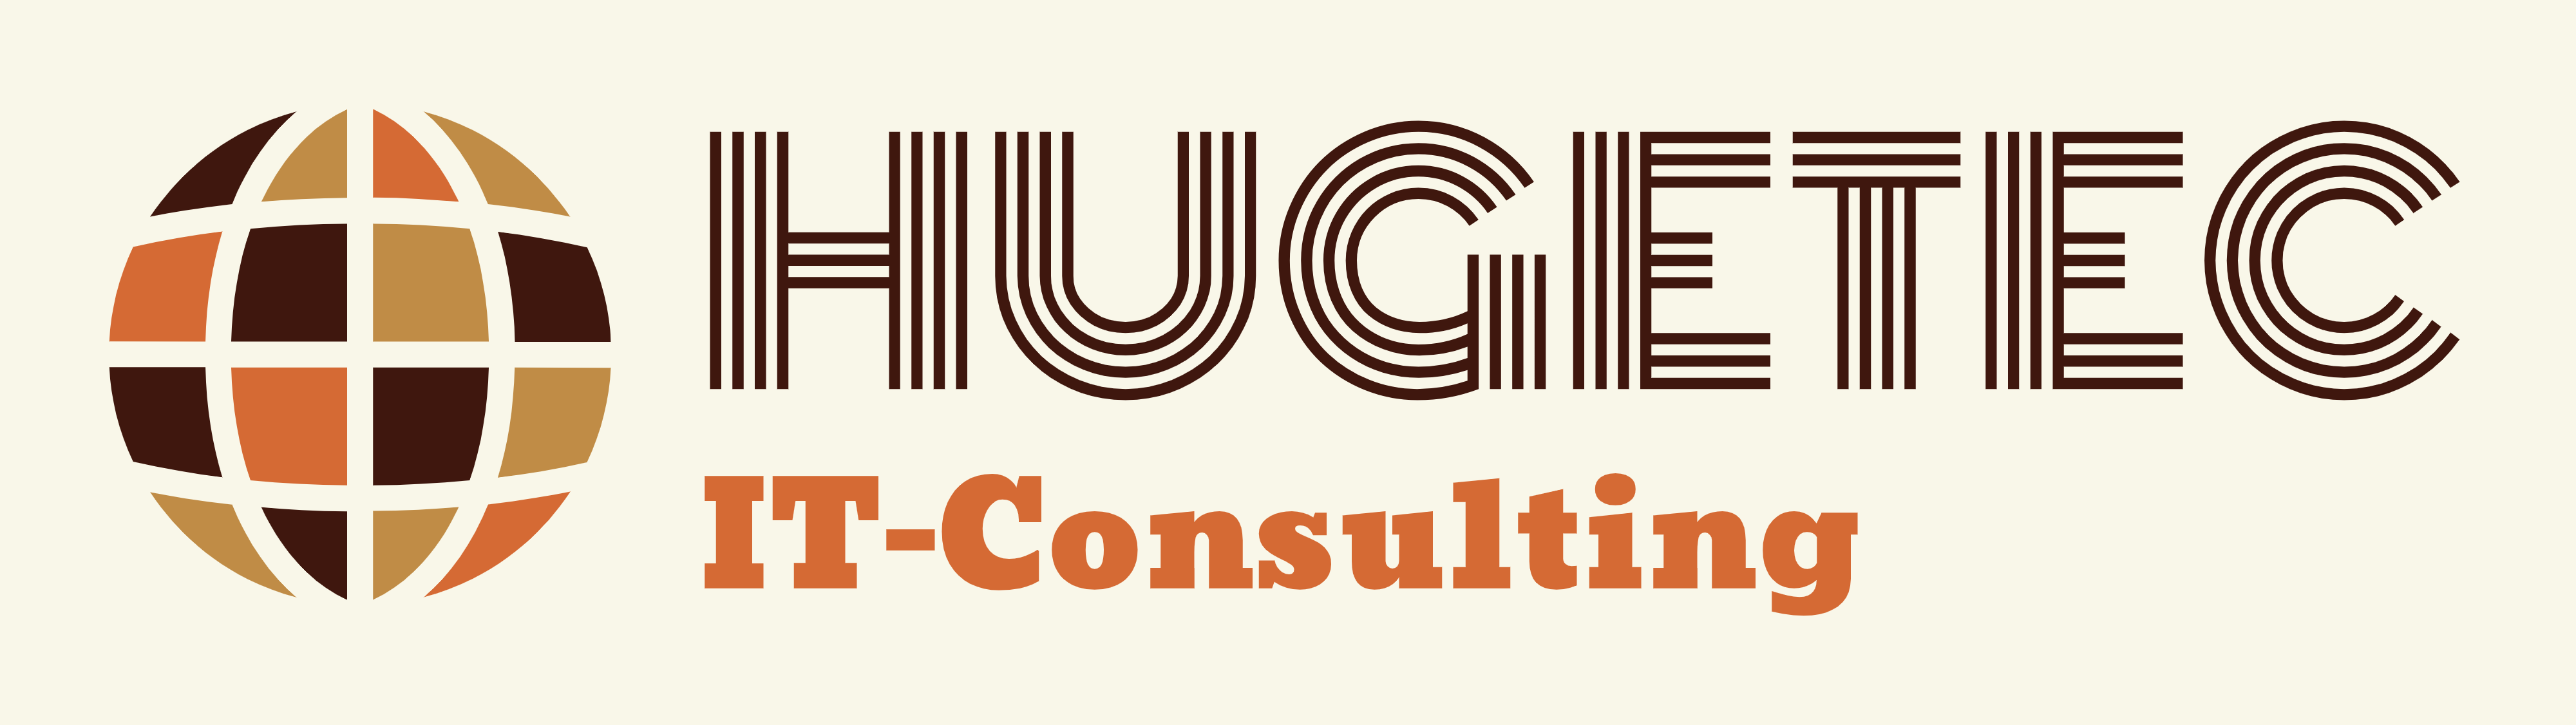 hugetec | IT Consulting & IT Solution